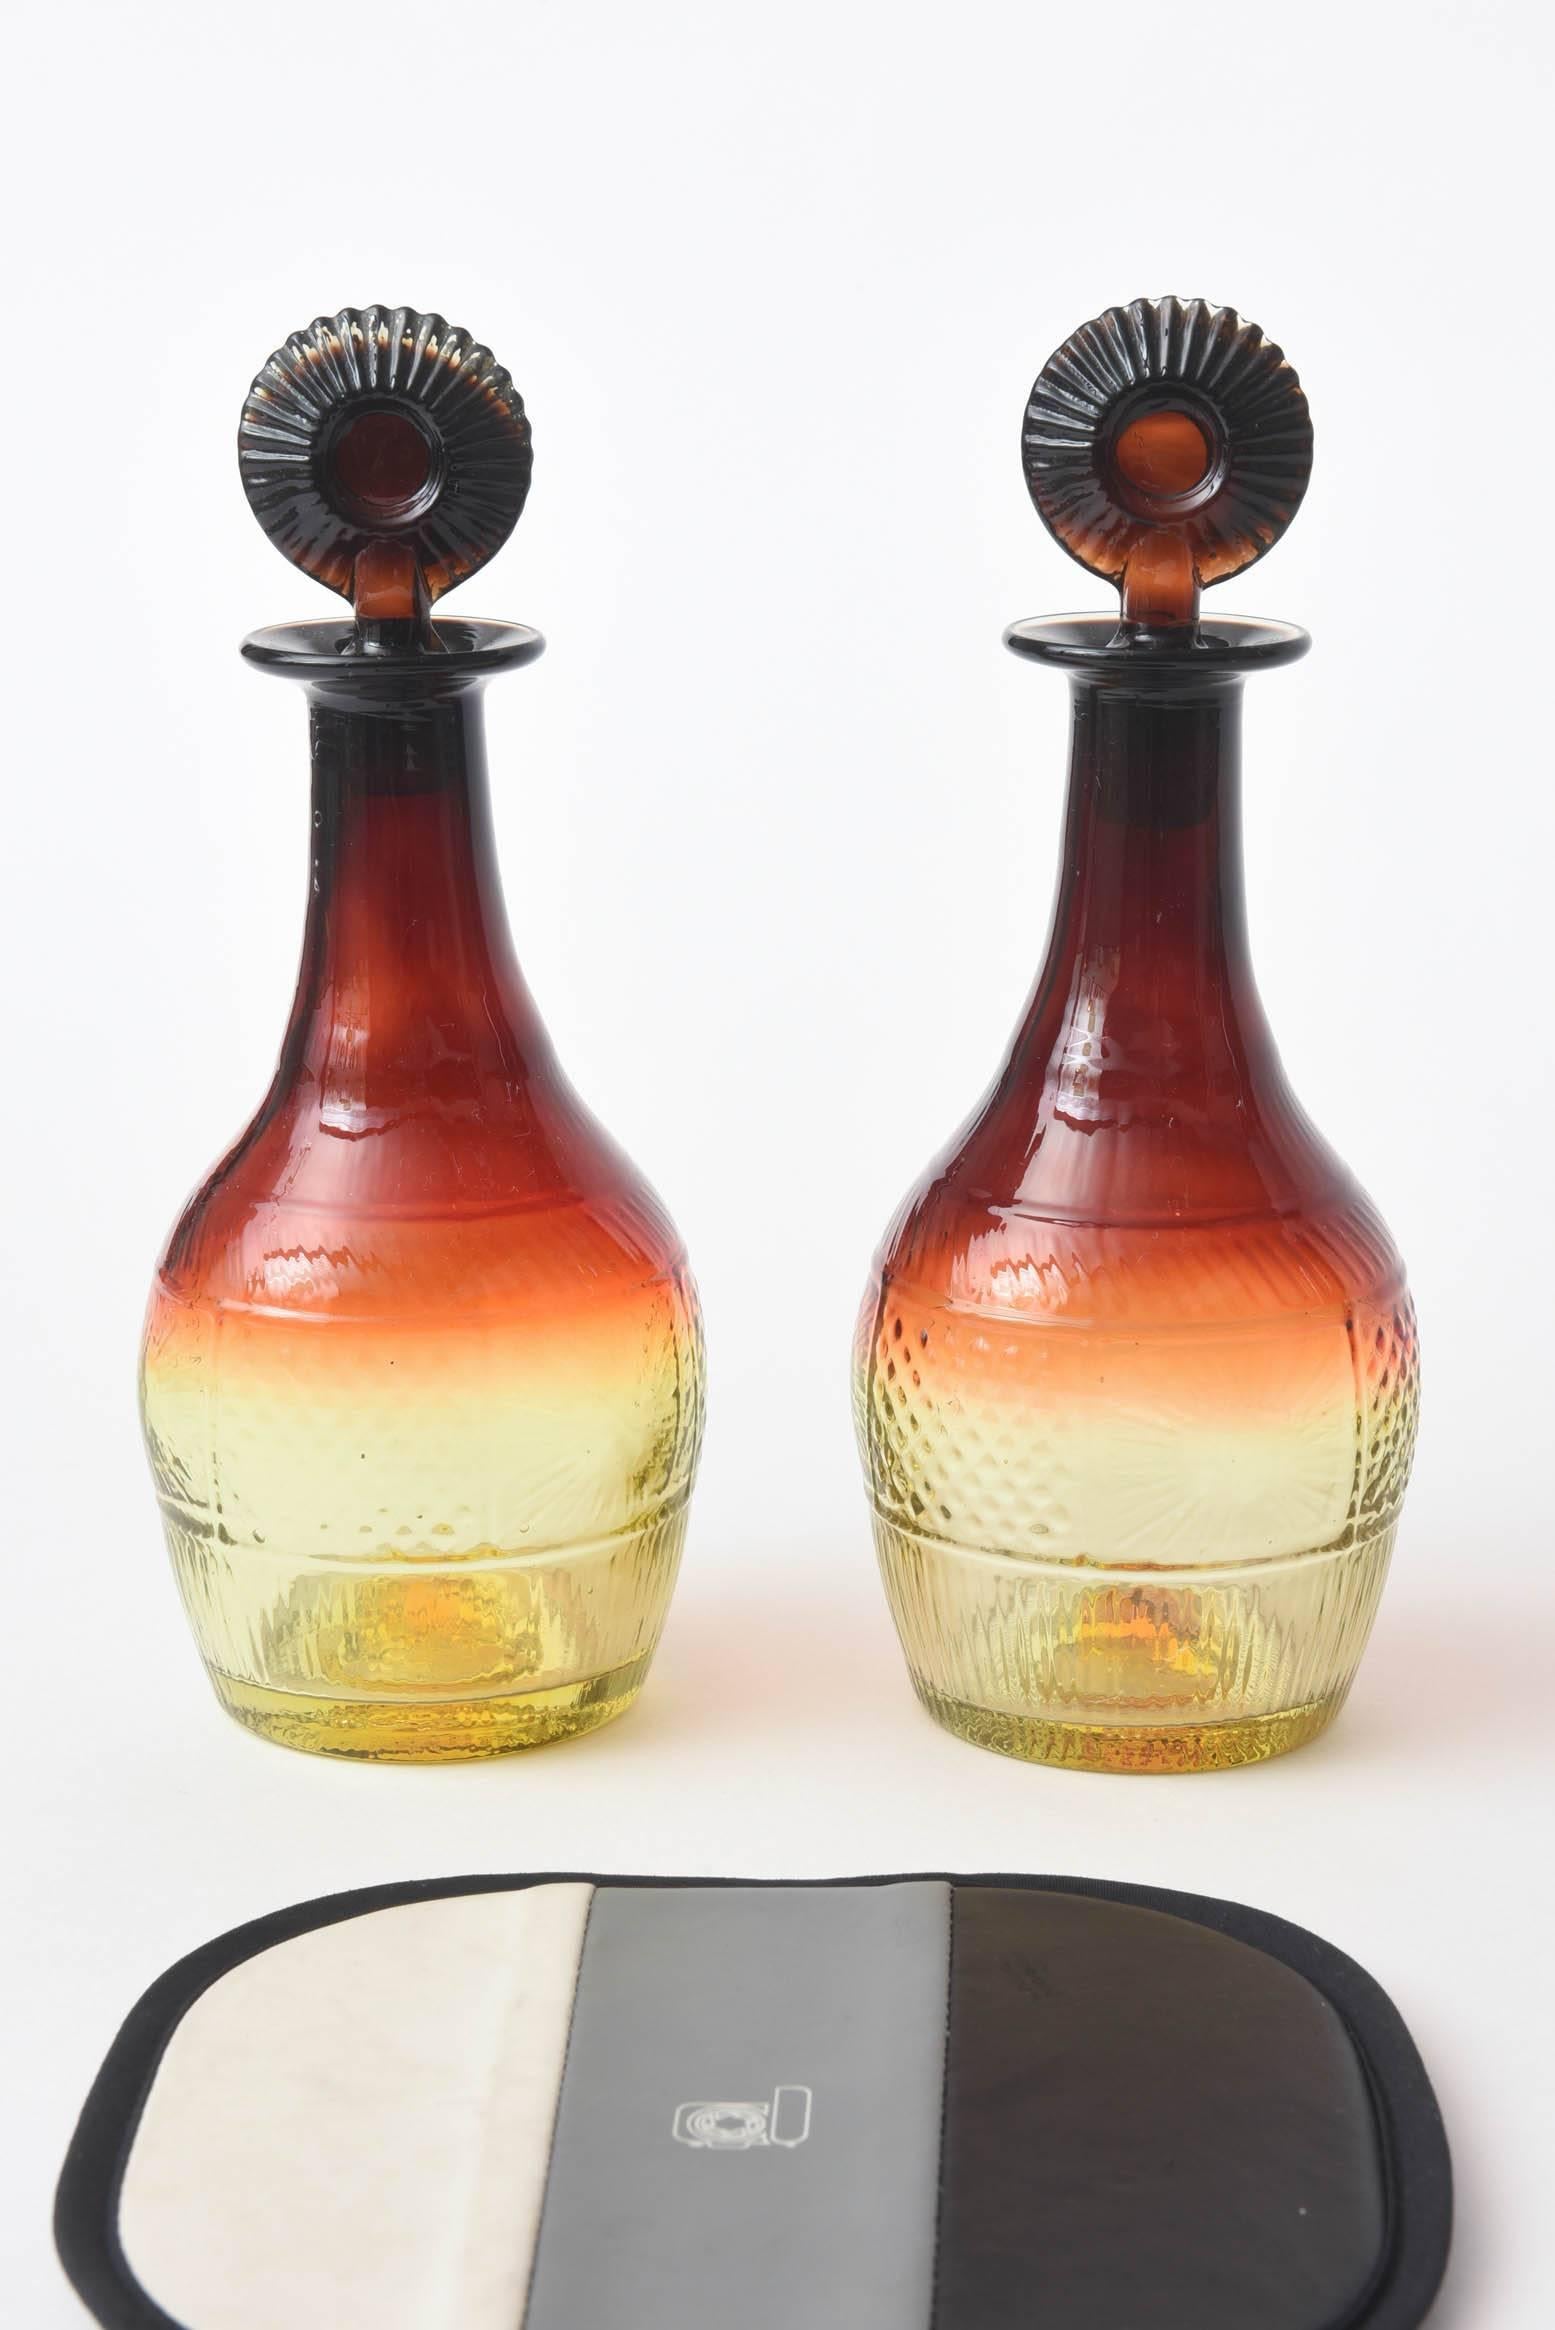 A great pair of antique decanters with unique stoppers and all over design. Decorative and practical and in fine antique condition.